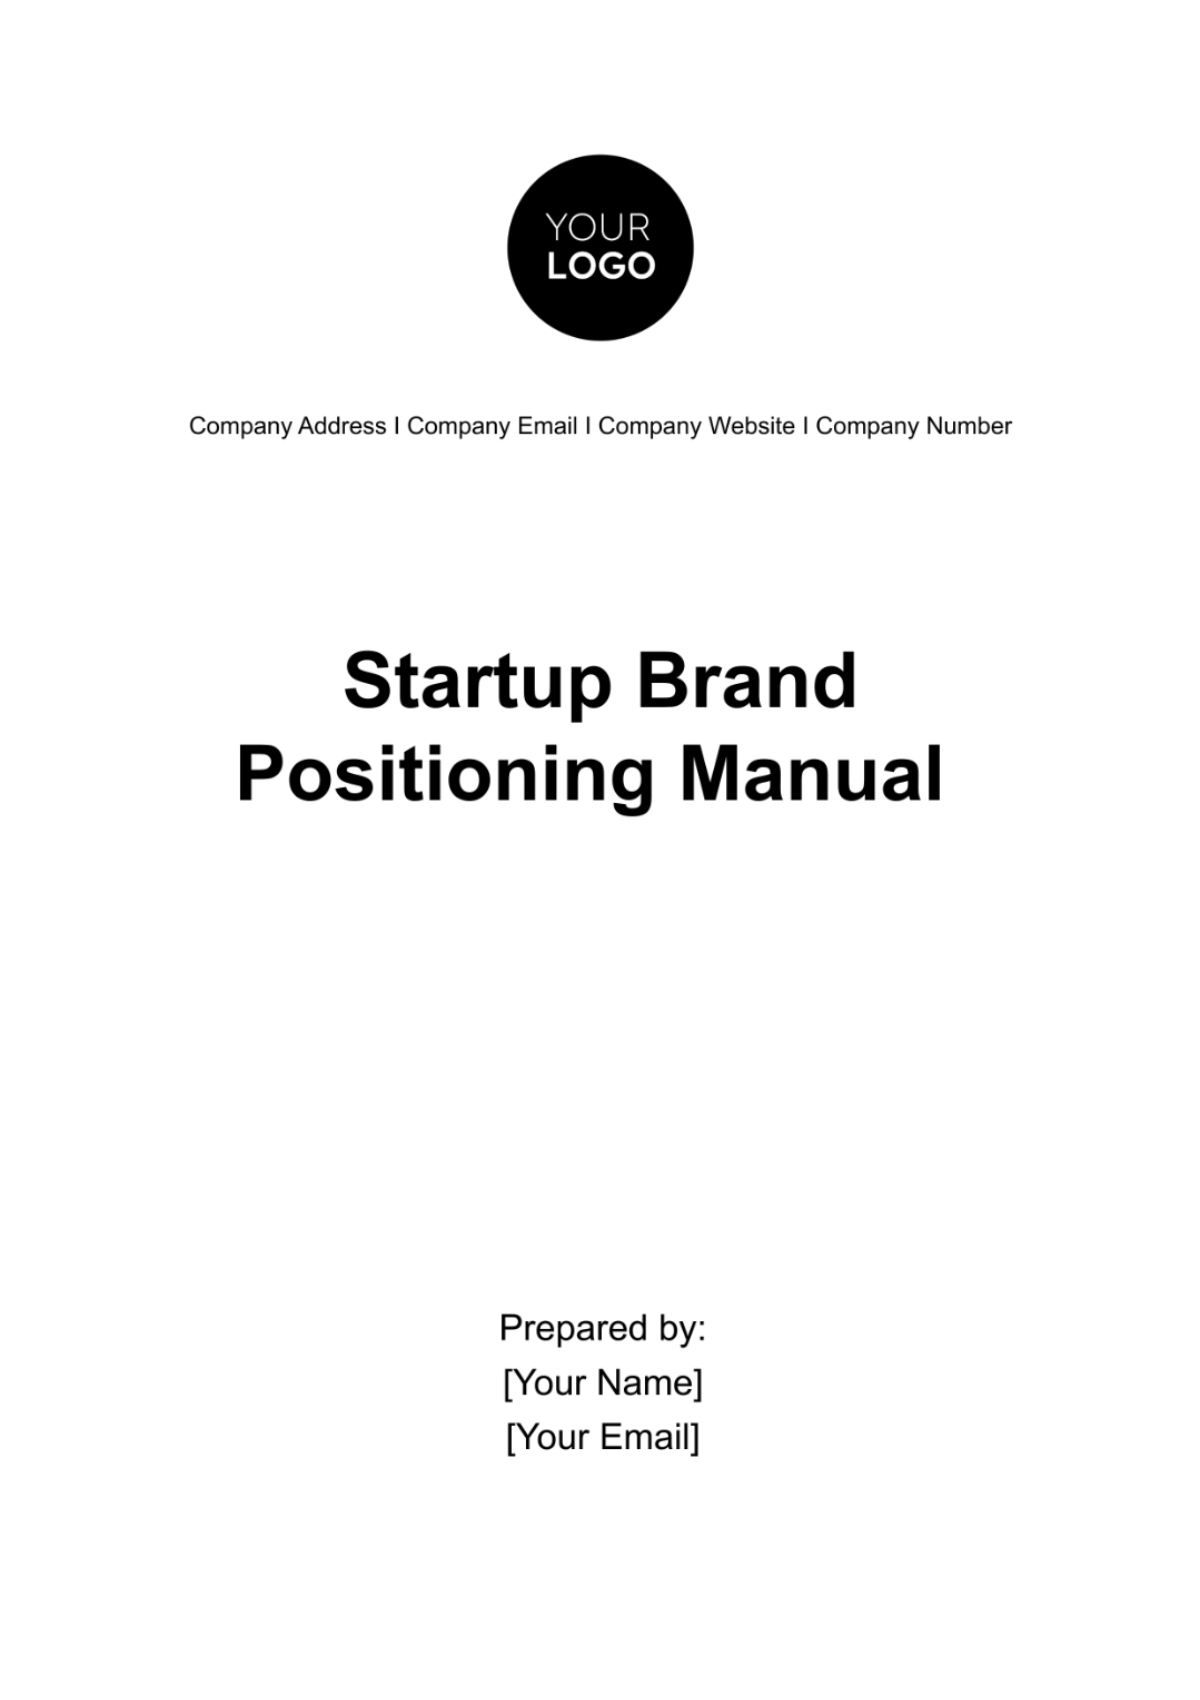 Startup Brand Positioning Manual Template